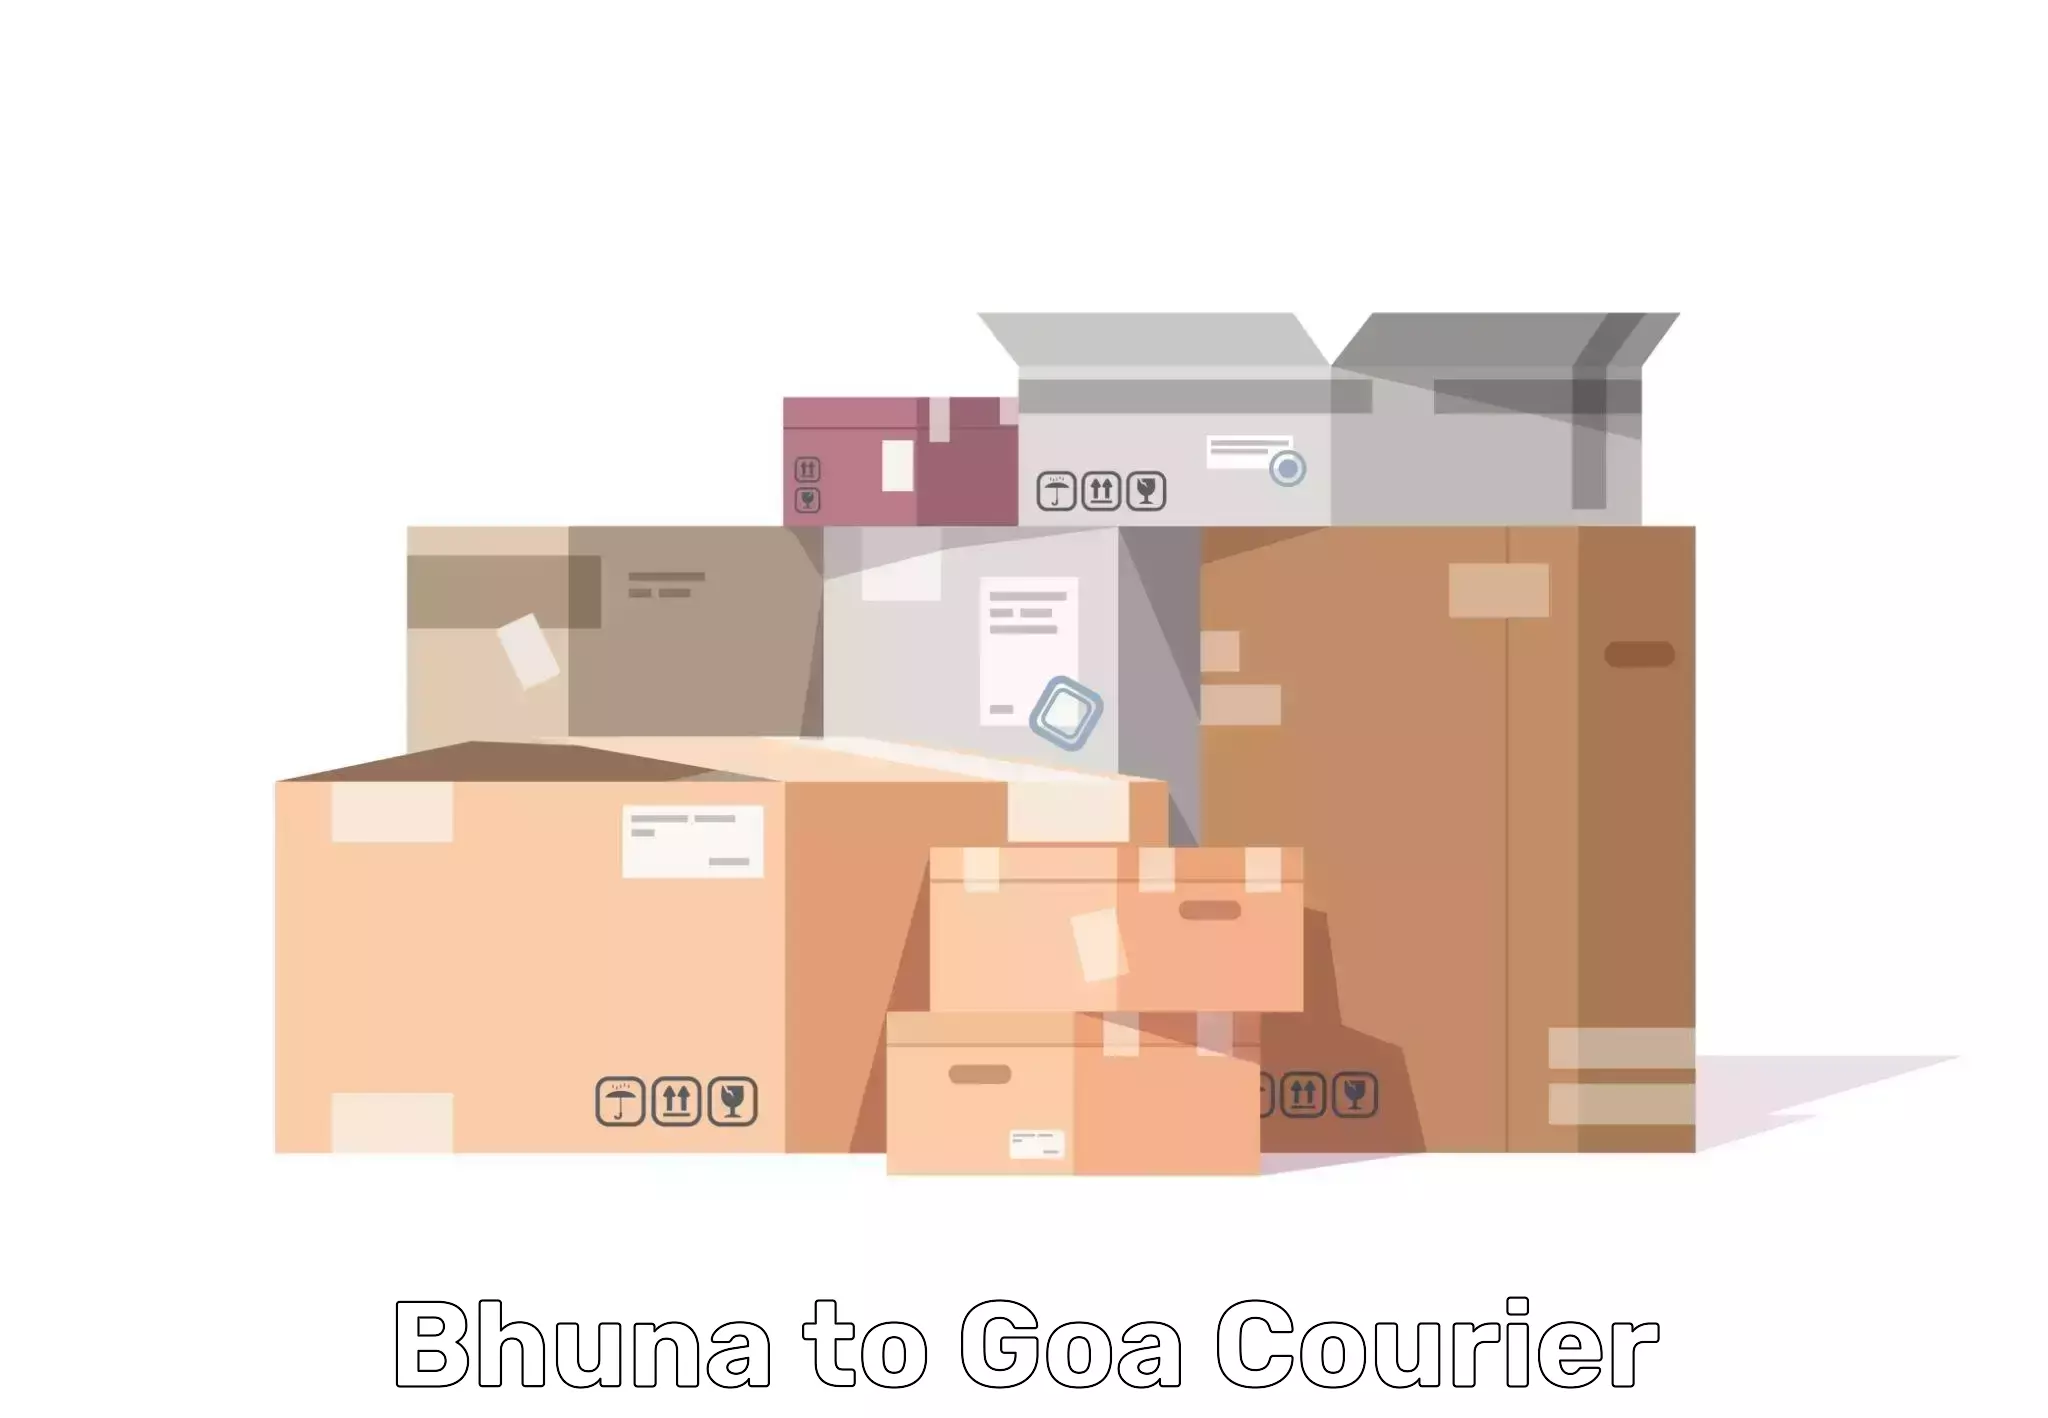 Trusted relocation experts Bhuna to Goa